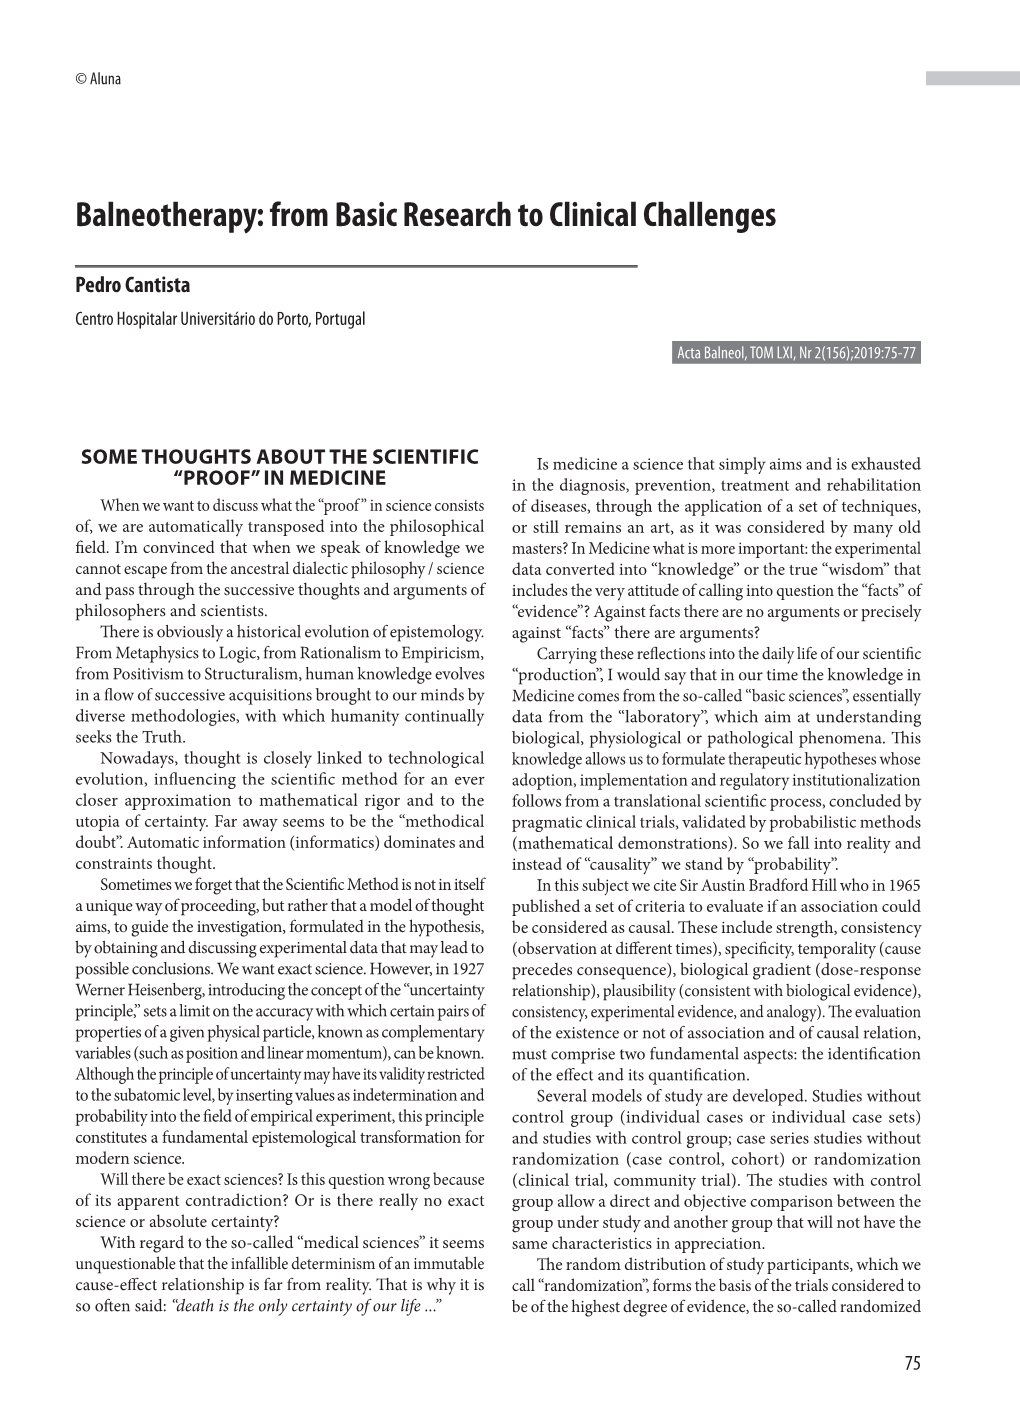 Balneotherapy: from Basic Research to Clinical Challenges